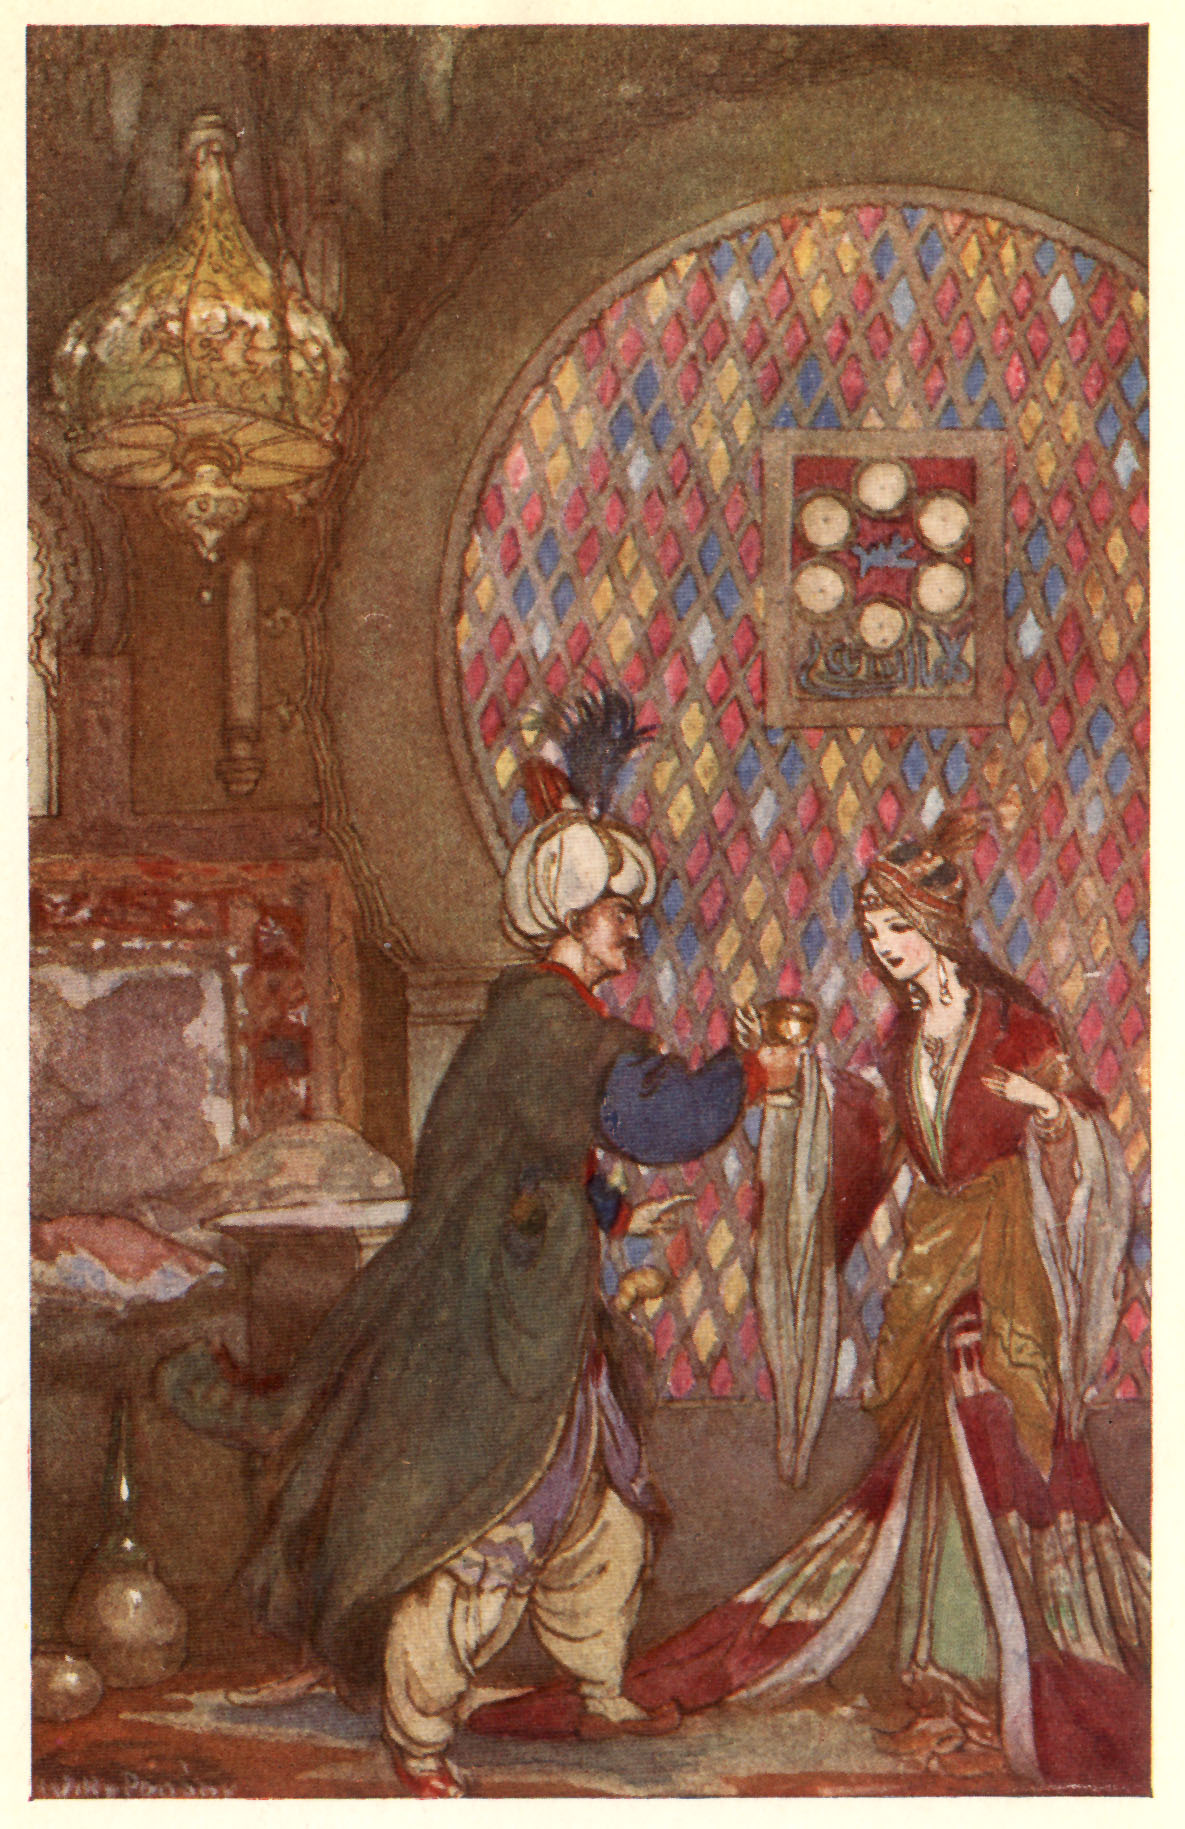 man in turban offering cup to woman in ornate gown